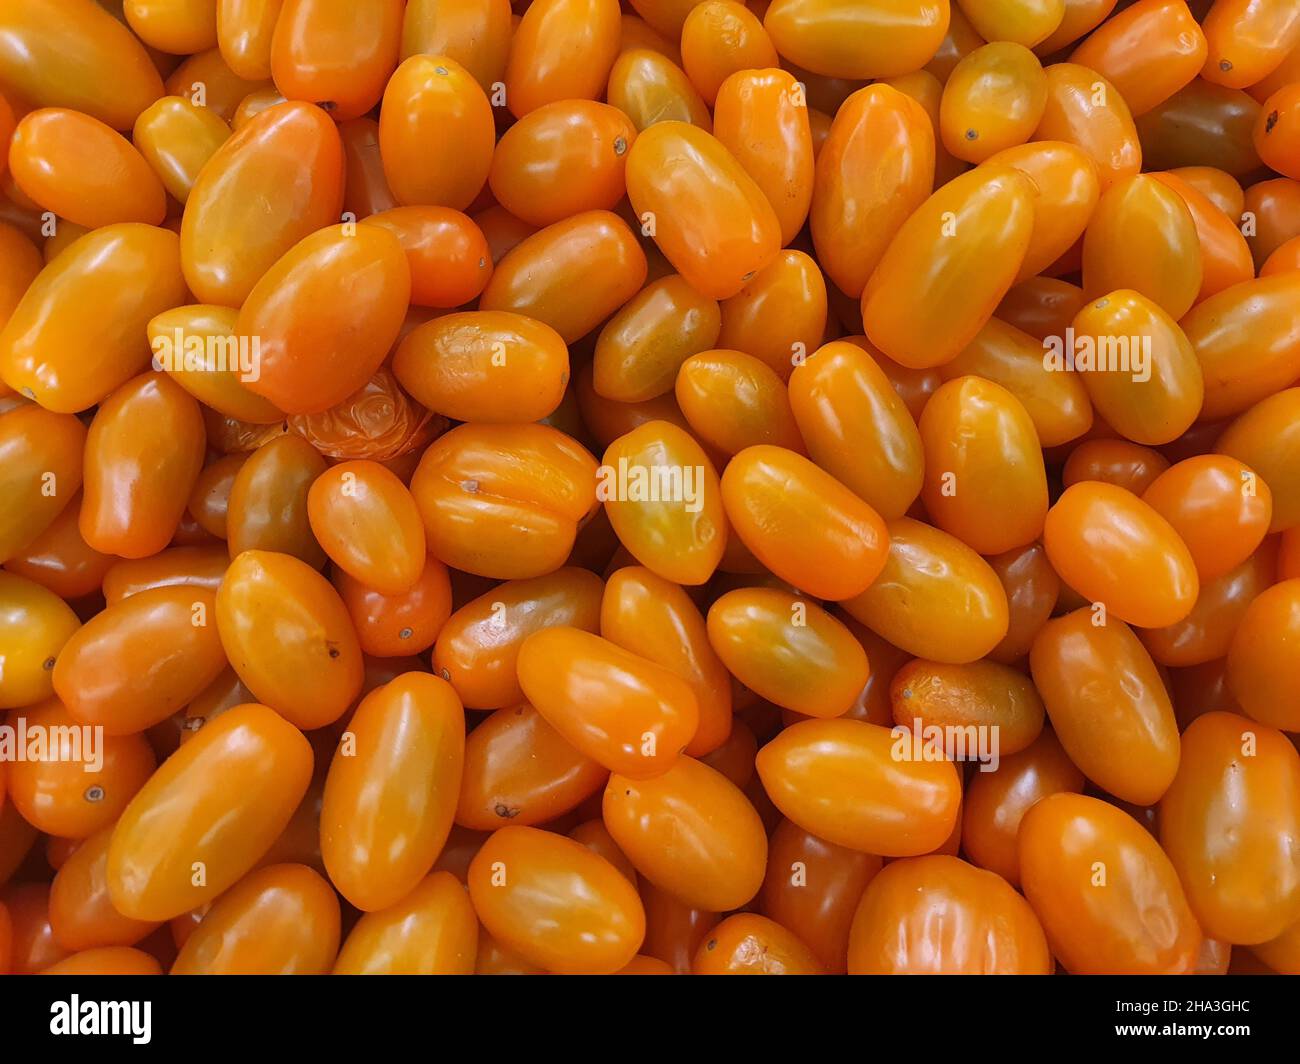 Cherry tomatoes, many, yellow (Solanum lycopersicum var. Cerasiforme, still with the stem, in the market. Top view. Stock Photo